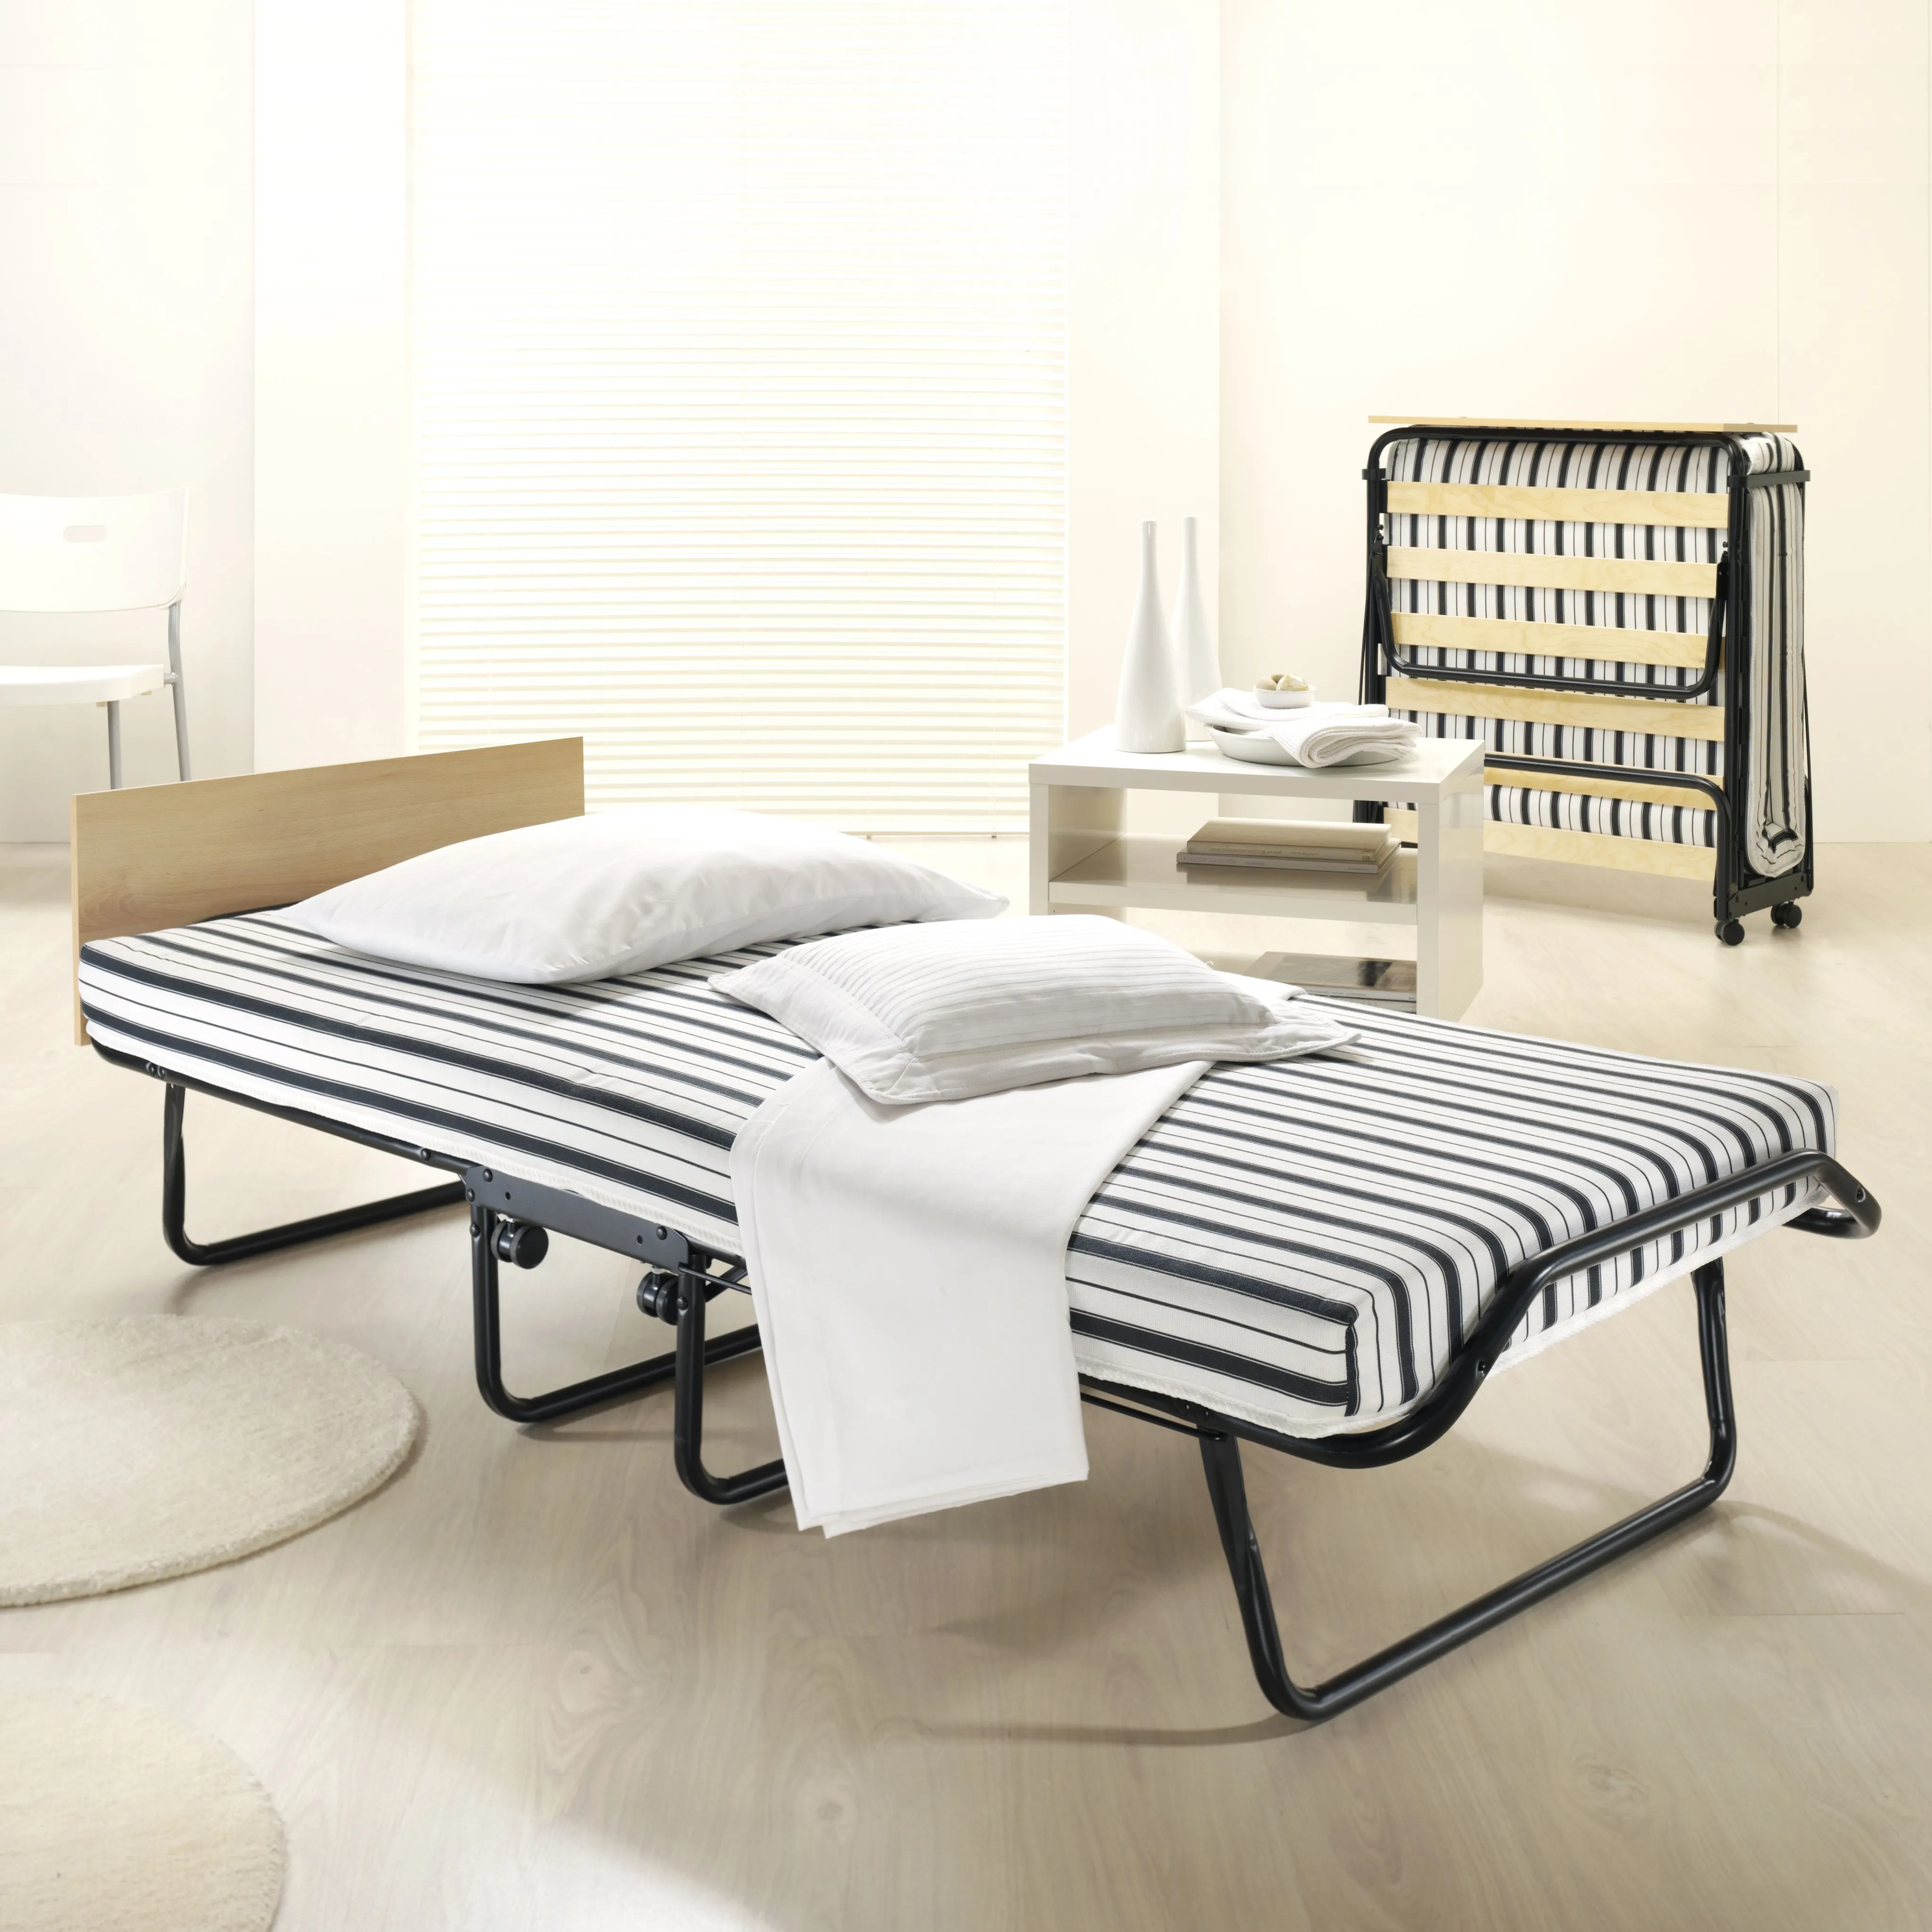 Jay-Be Jubilee Single Foldable Guest bed with Airflow mattress